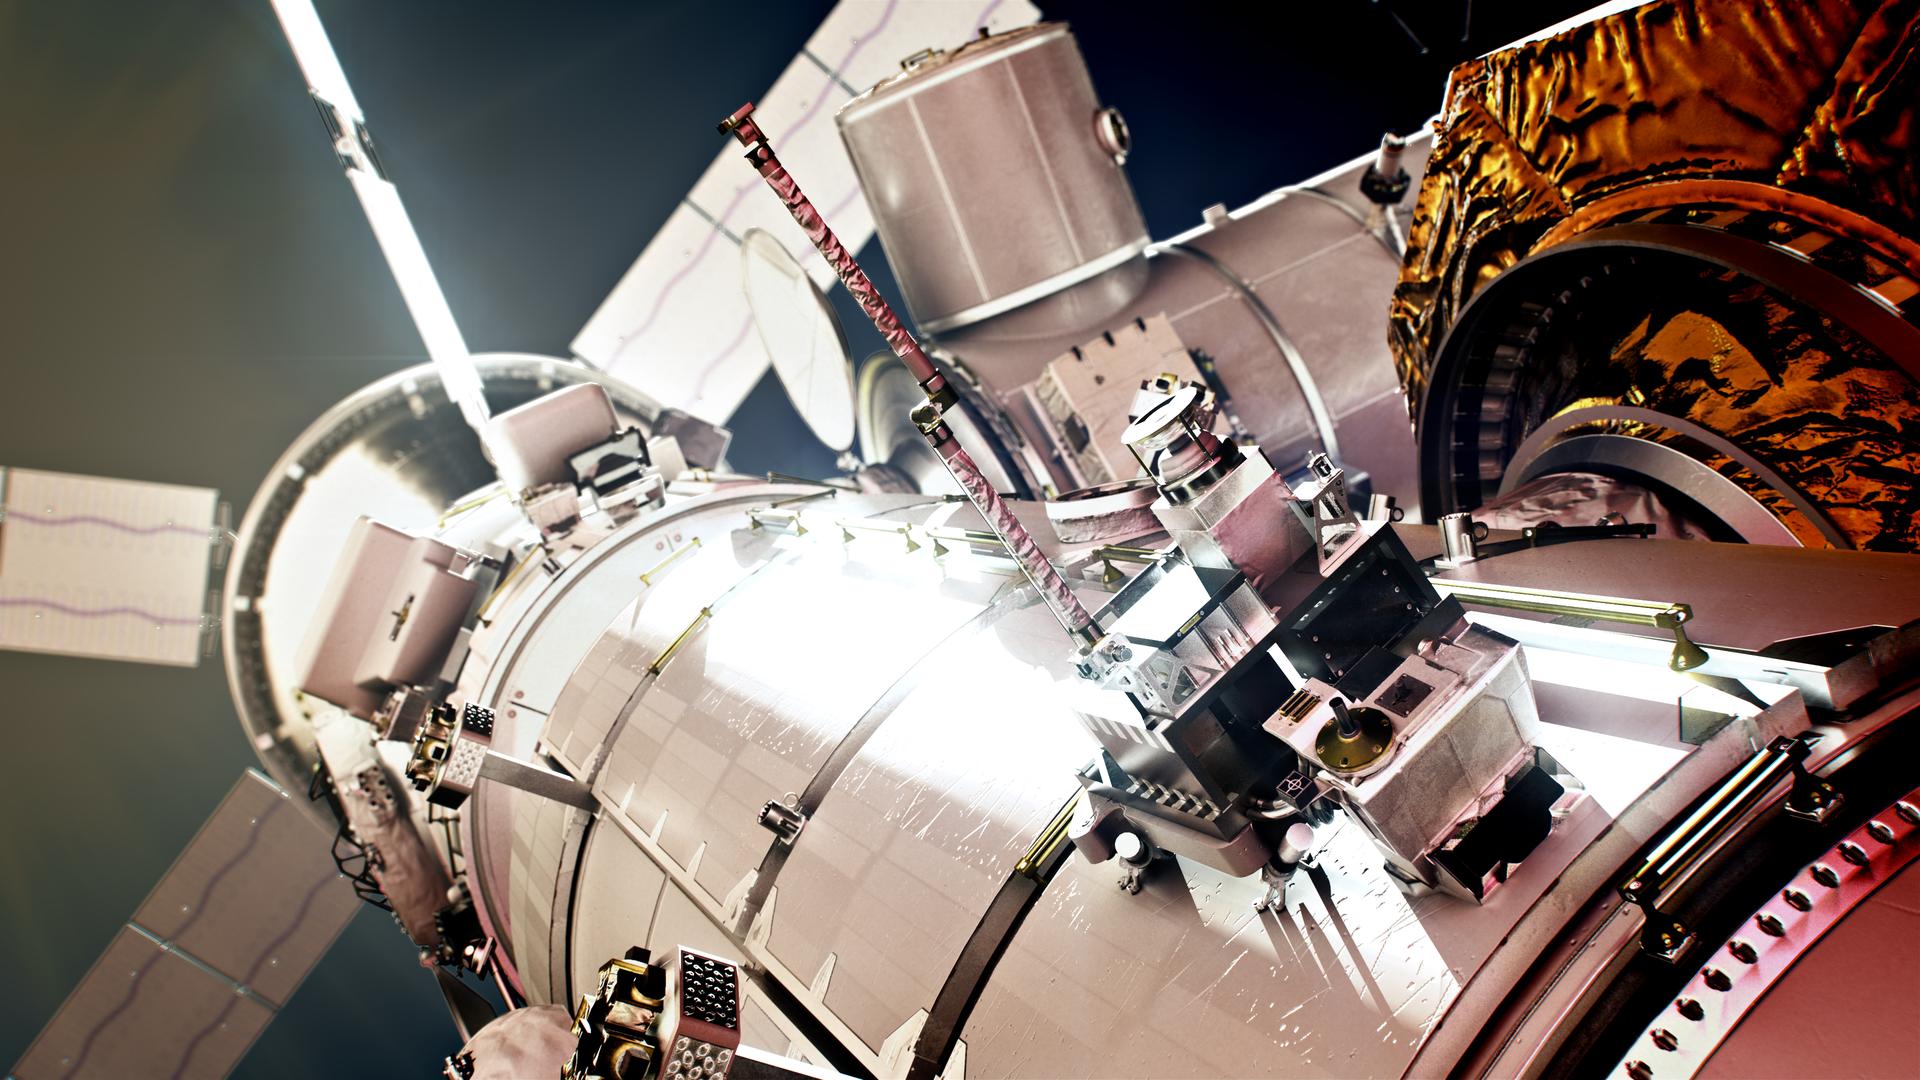 A close-up view of a space station module with intricate details and components under bright lighting